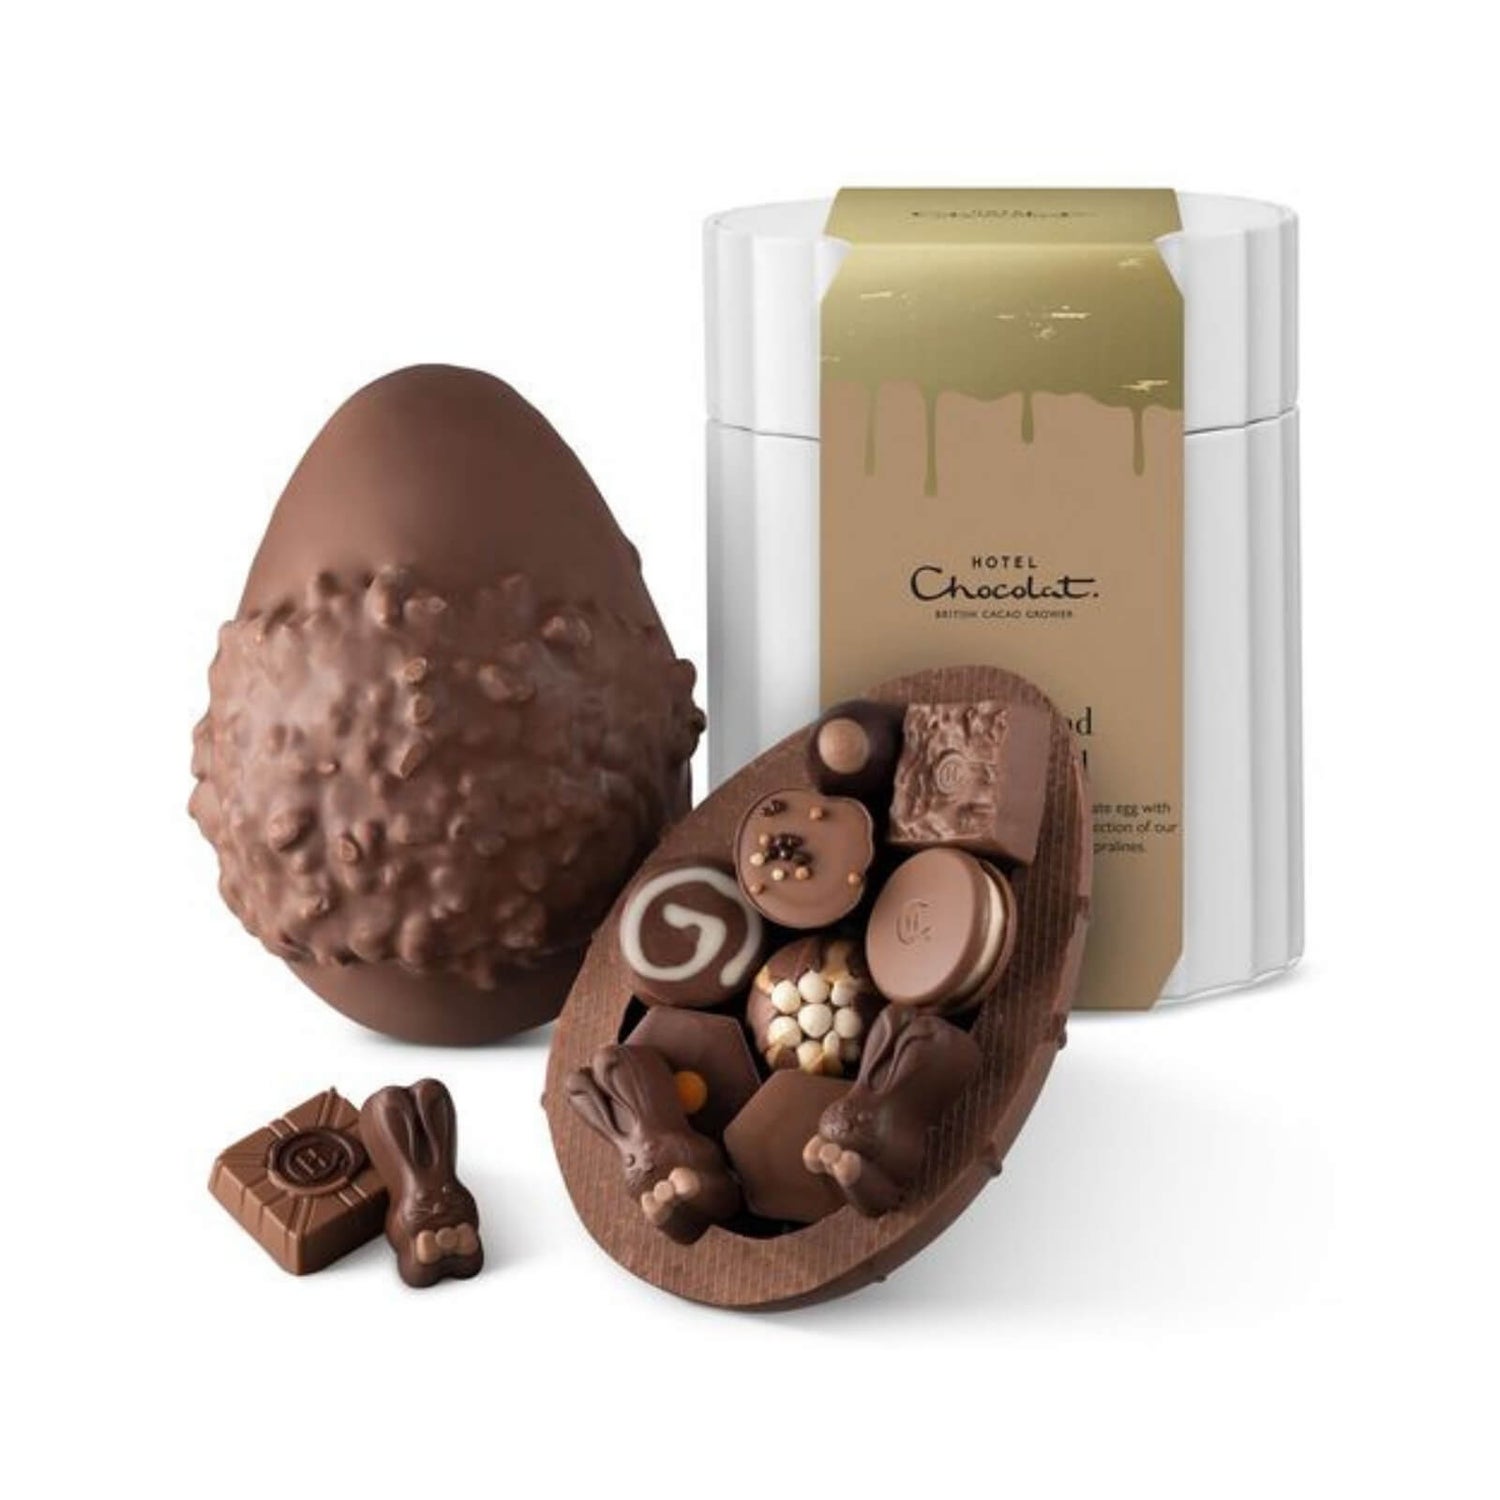 Extra Thick Easter Egg - Rocky Road to Caramel